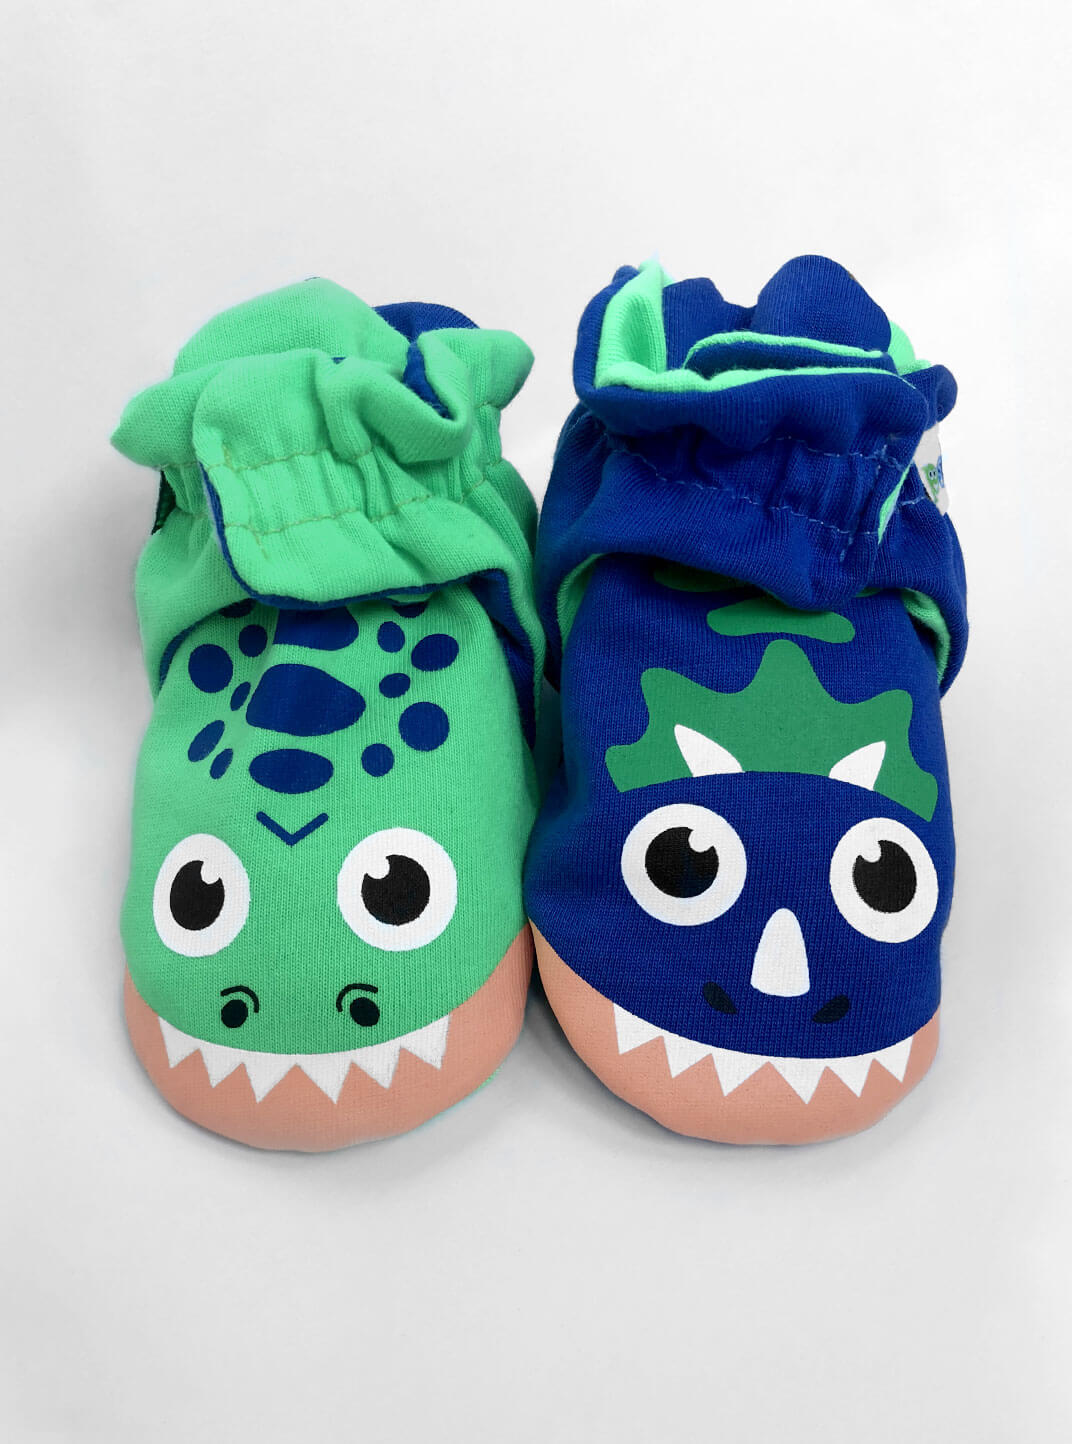 T-Rex & Triceratops | Mismatched Baby Dino Booties